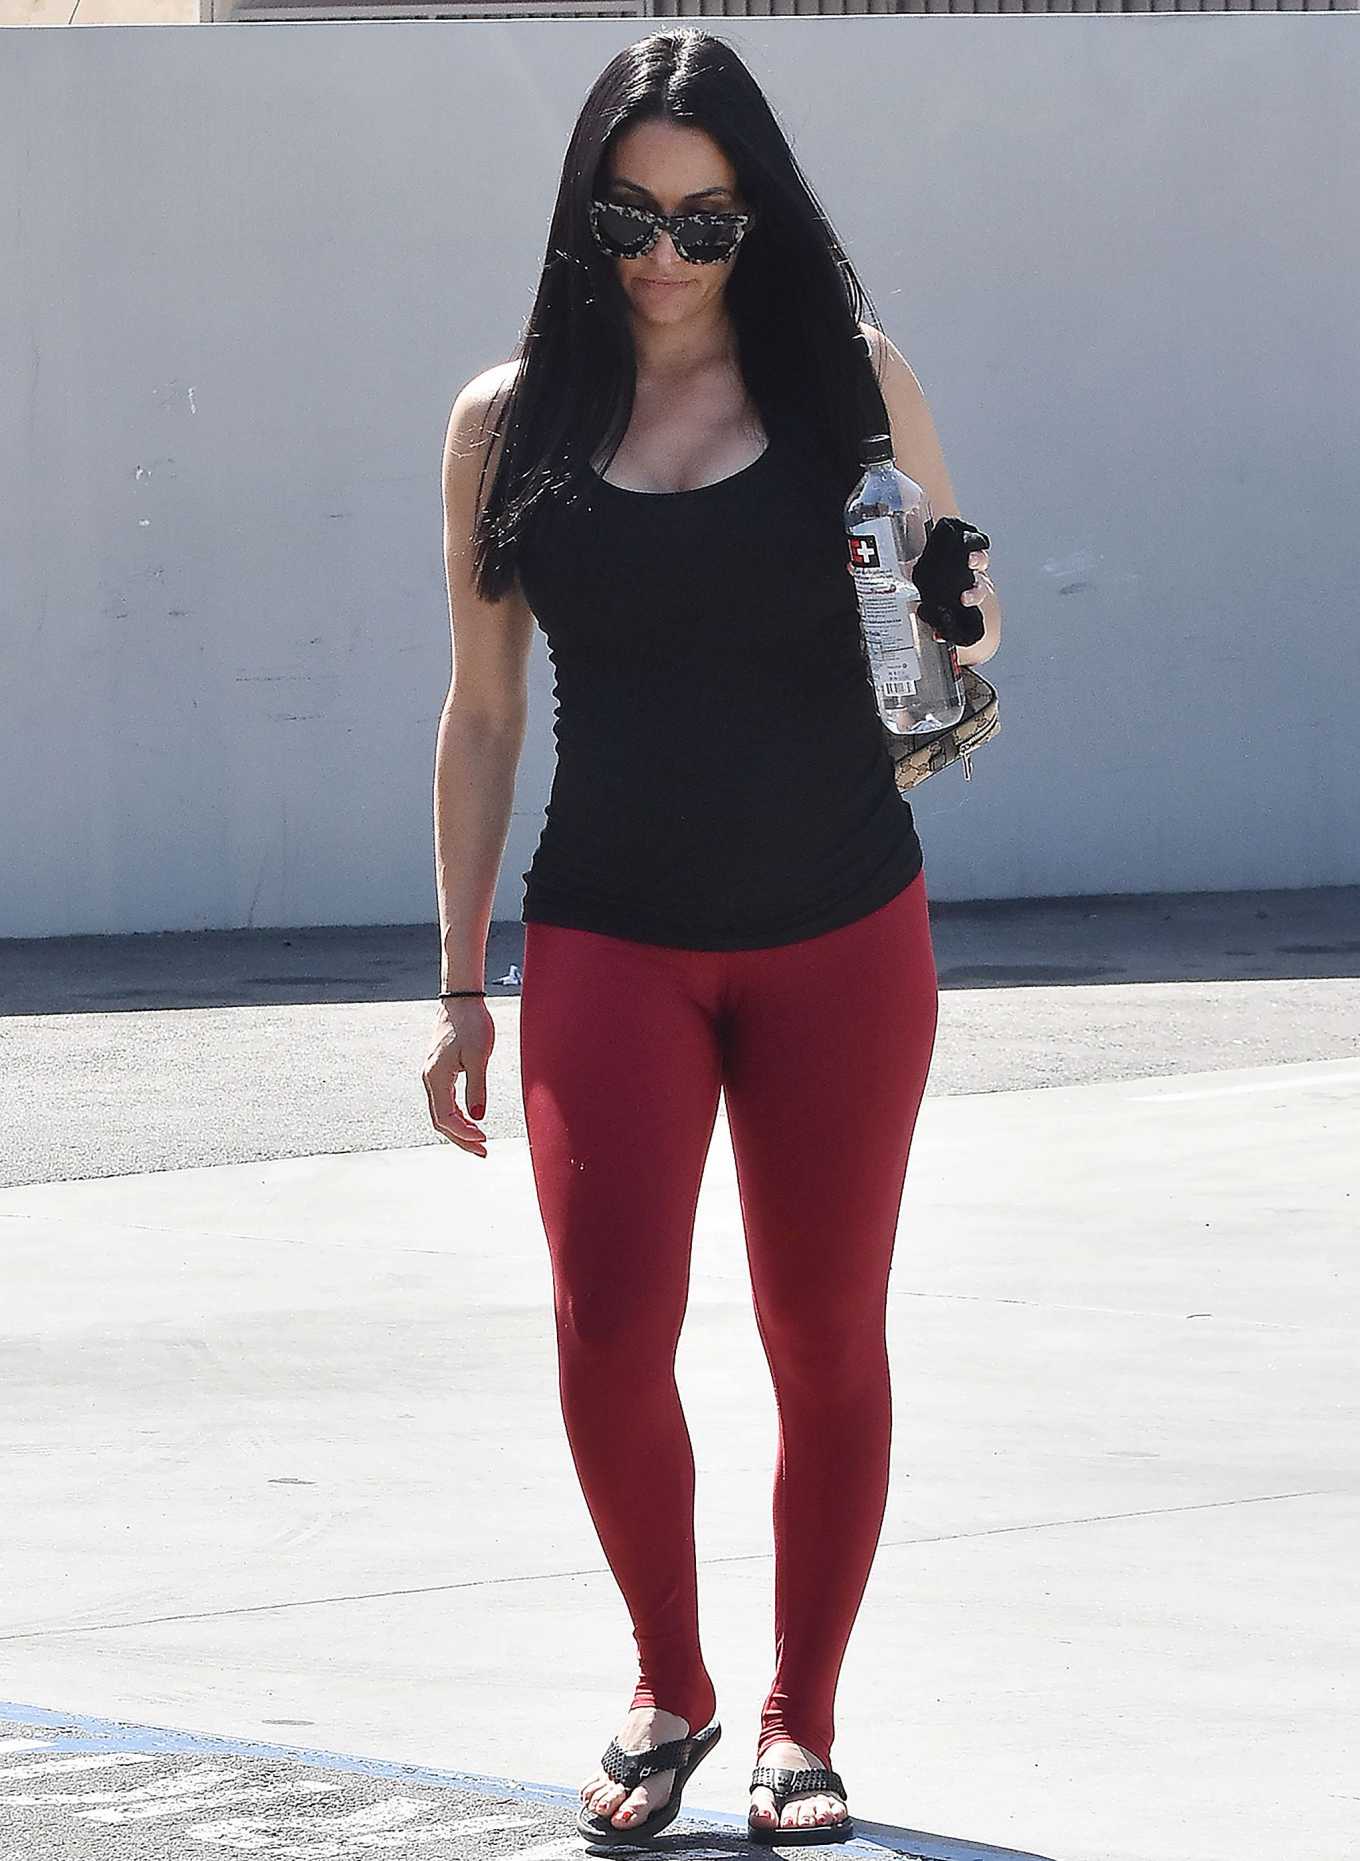 Nikki Bella in red Tights â€“ Out and about in Los Angeles